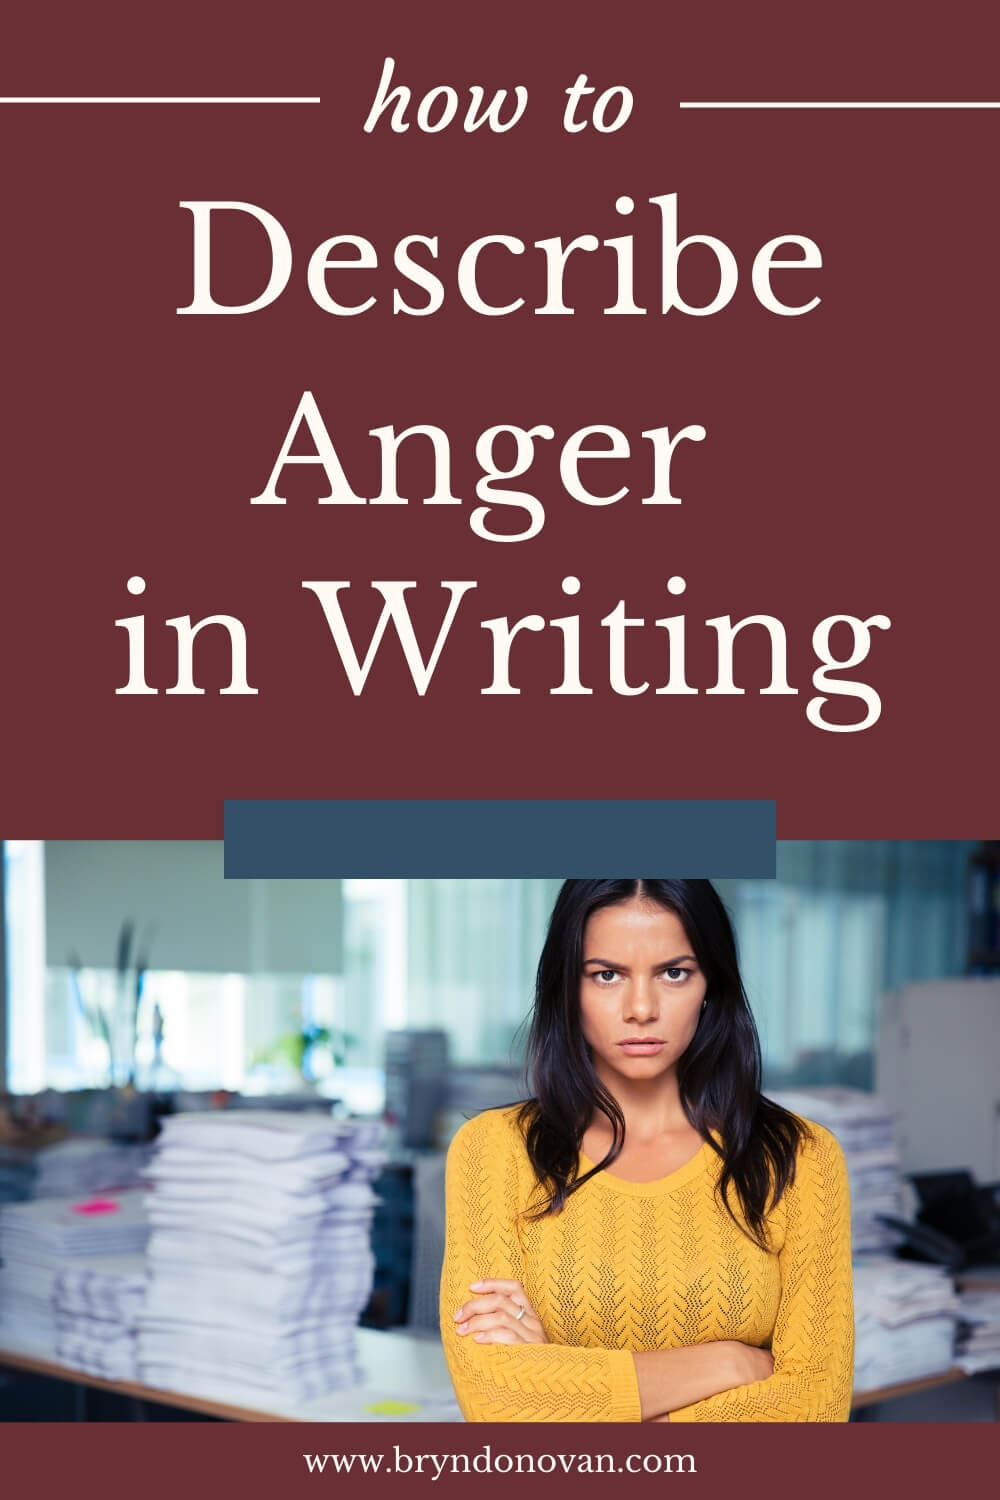 How to Describe Anger in Writing | woman with angry expression